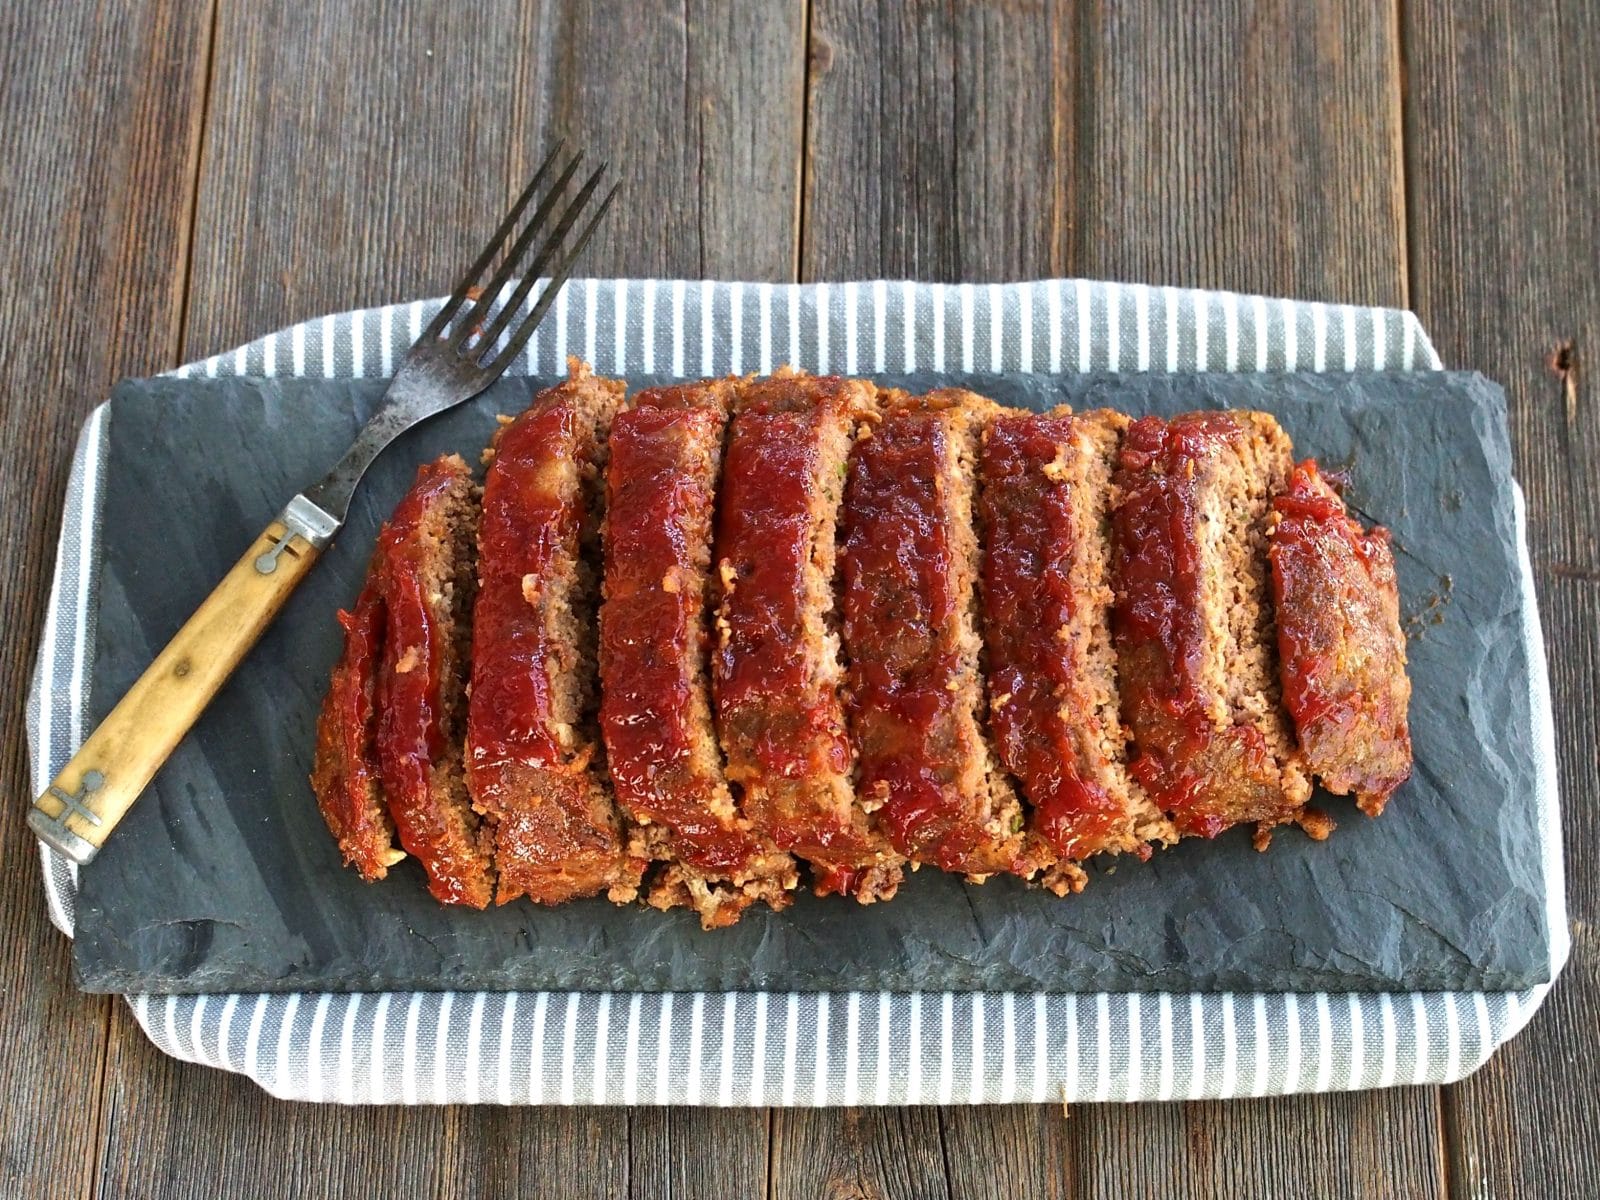 My Favorite Meatloaf-simple and flavorful. Serve as an entree or slice and place on toasty buns for great sandwiches. This recipe impresses every time. Simply Sated